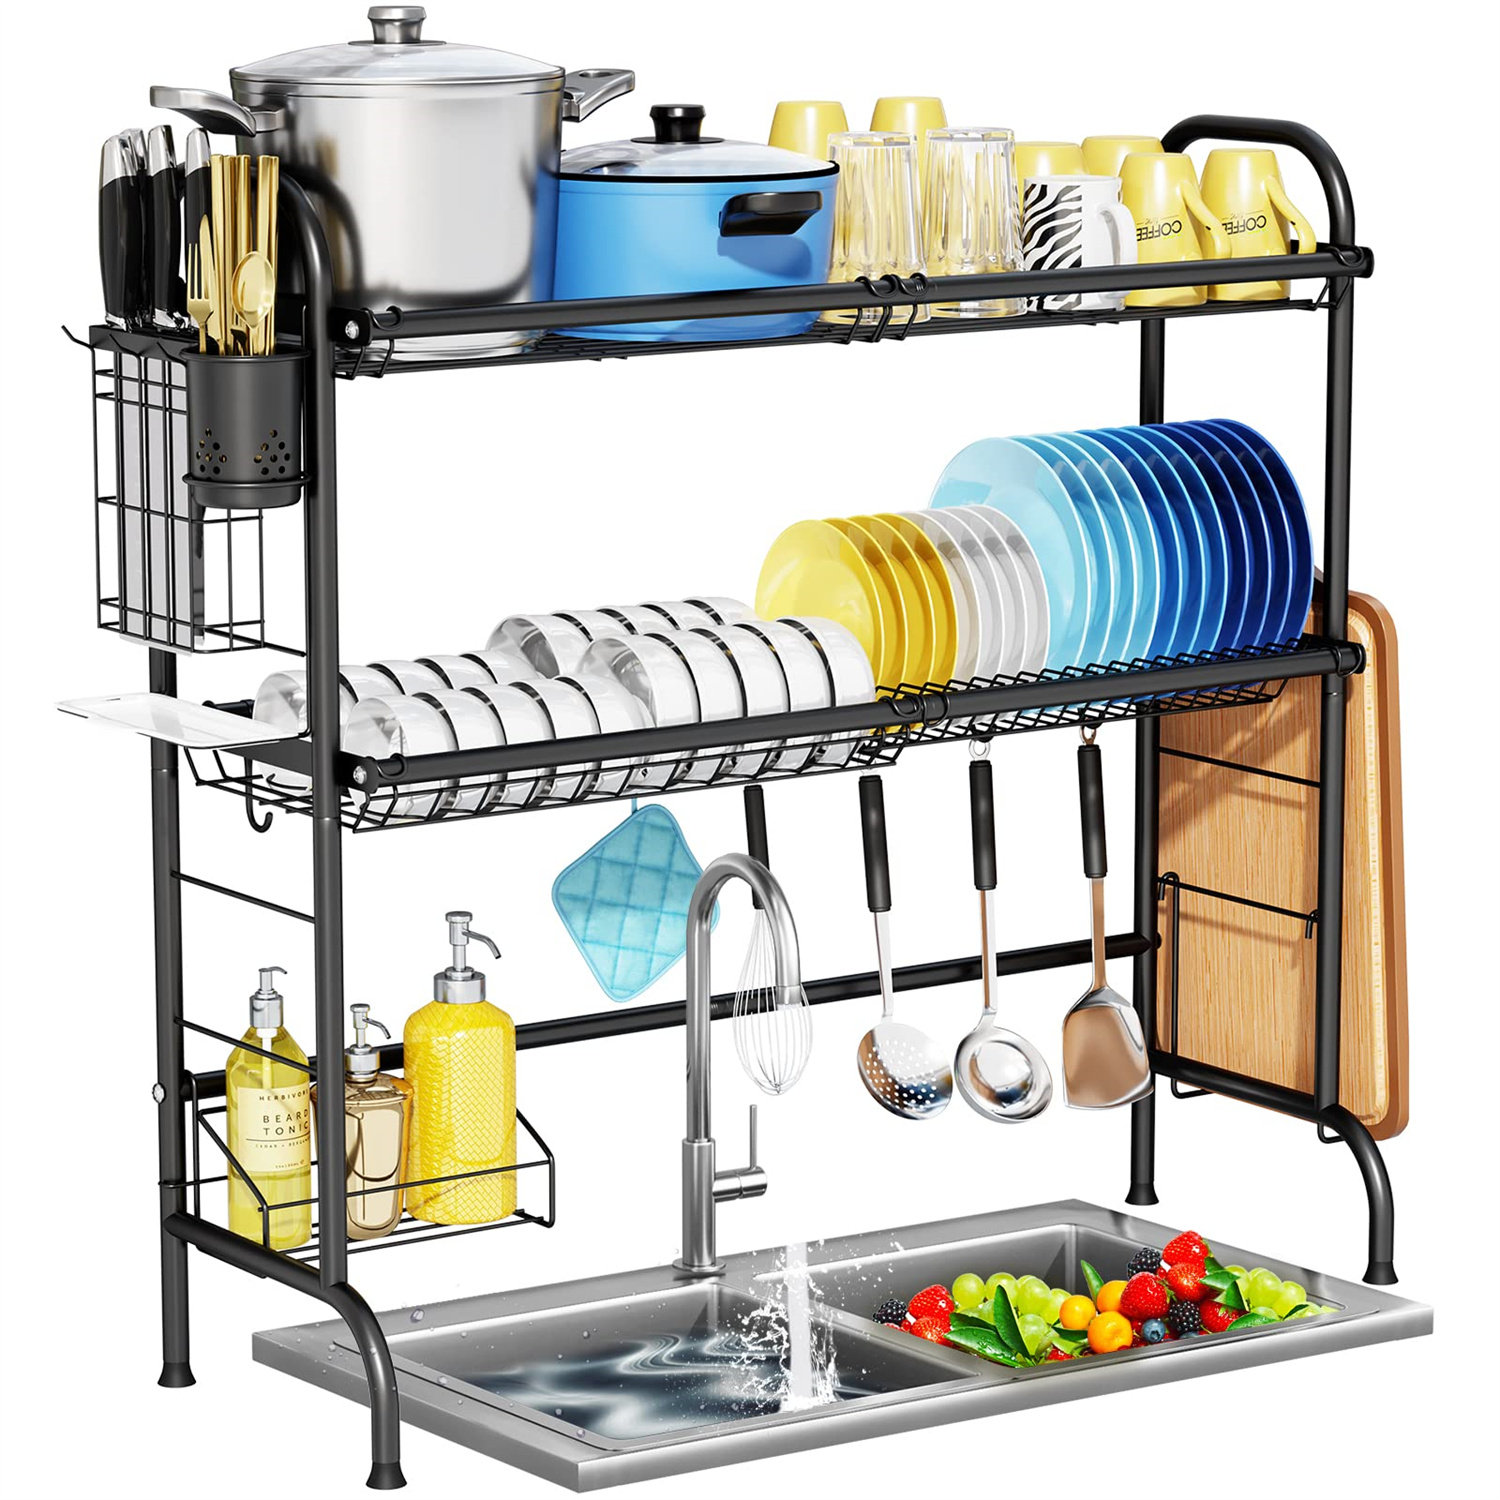 Over The Sink Dish Drying Rack Boosiny 2 Tier Stainless Steel Large  Adjustable